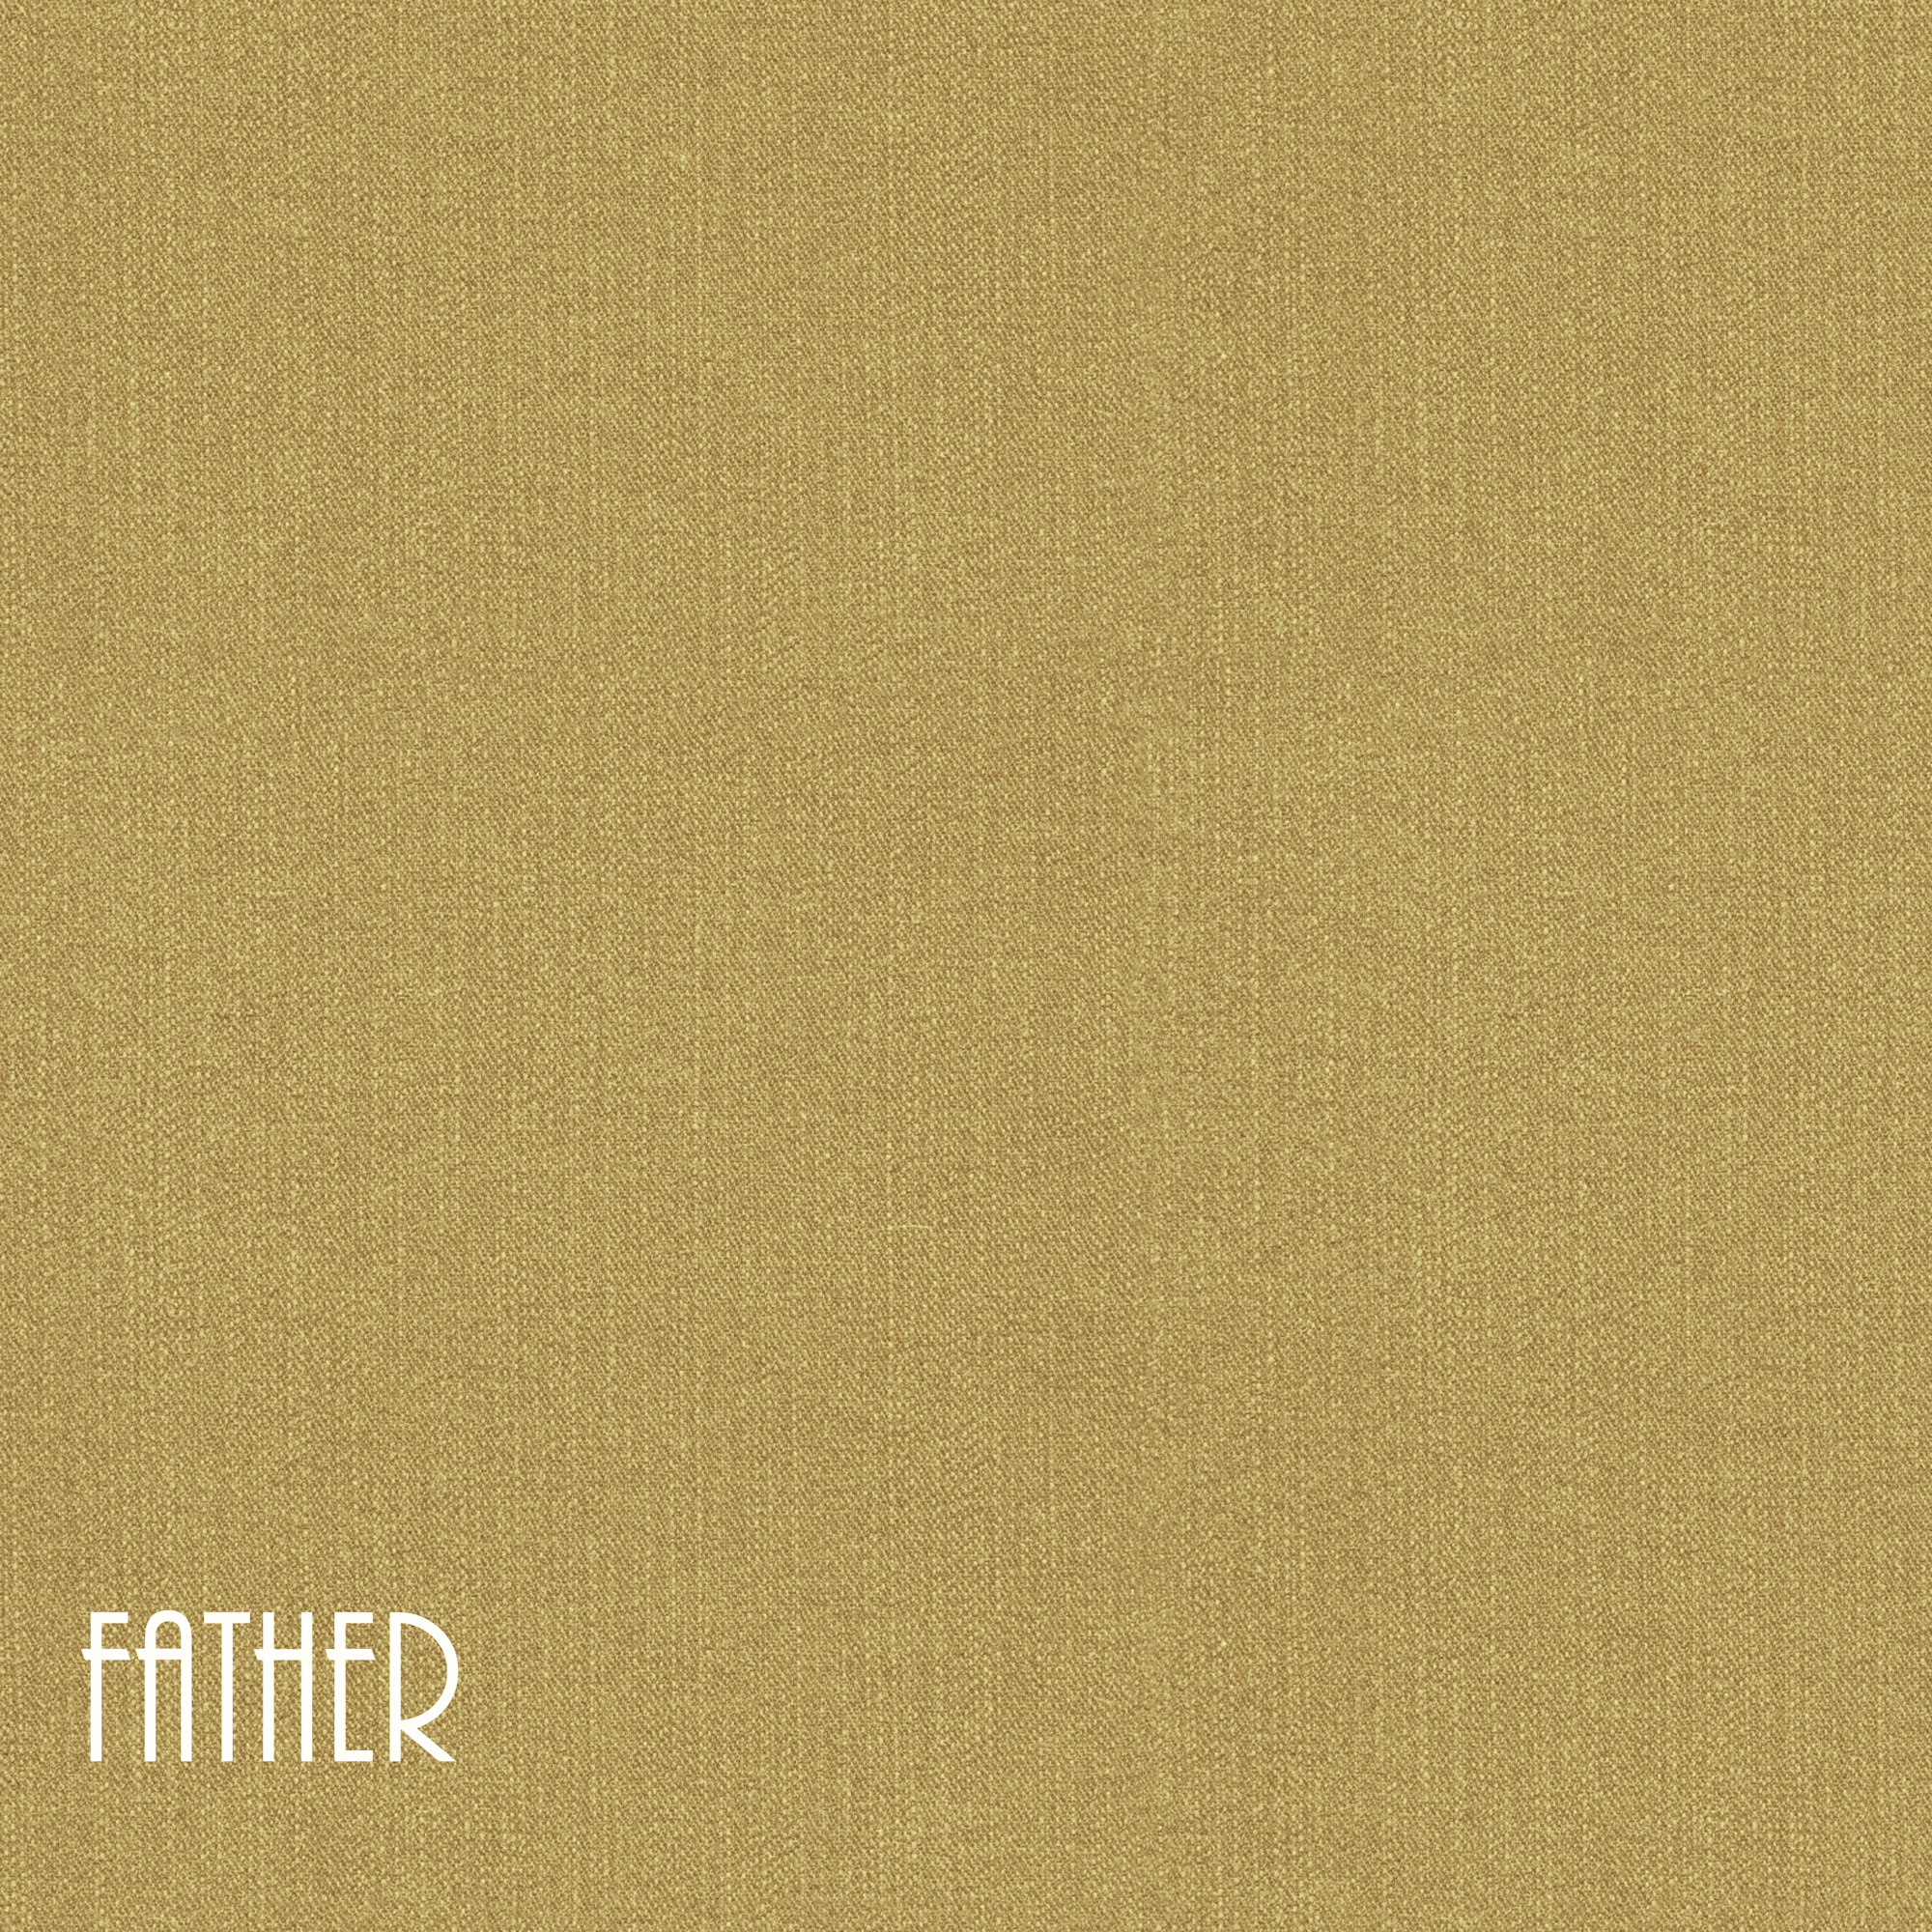 Family Collection Father 12 x 12 Double-Sided Scrapbook Paper by SSC Designs